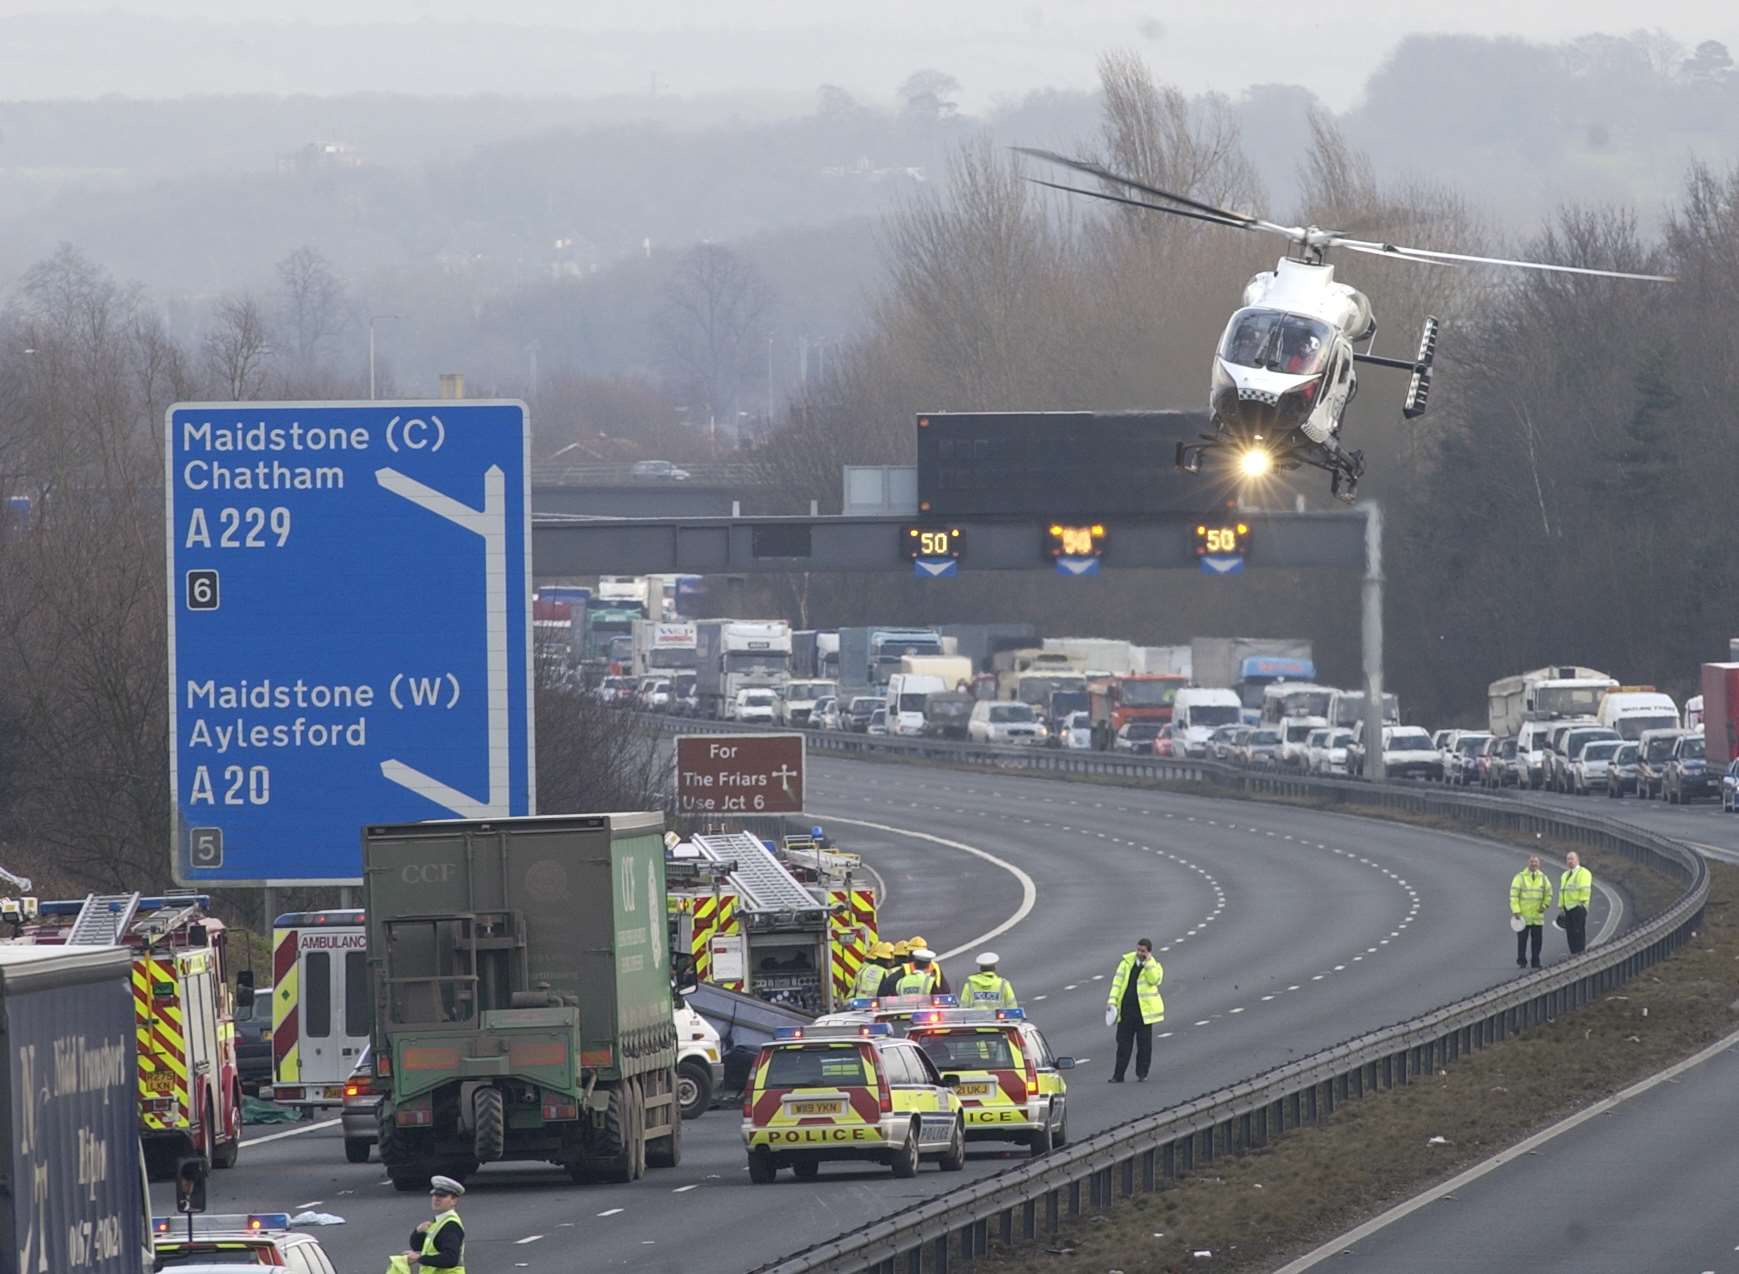 The air ambulance in action on the M20. Library image.